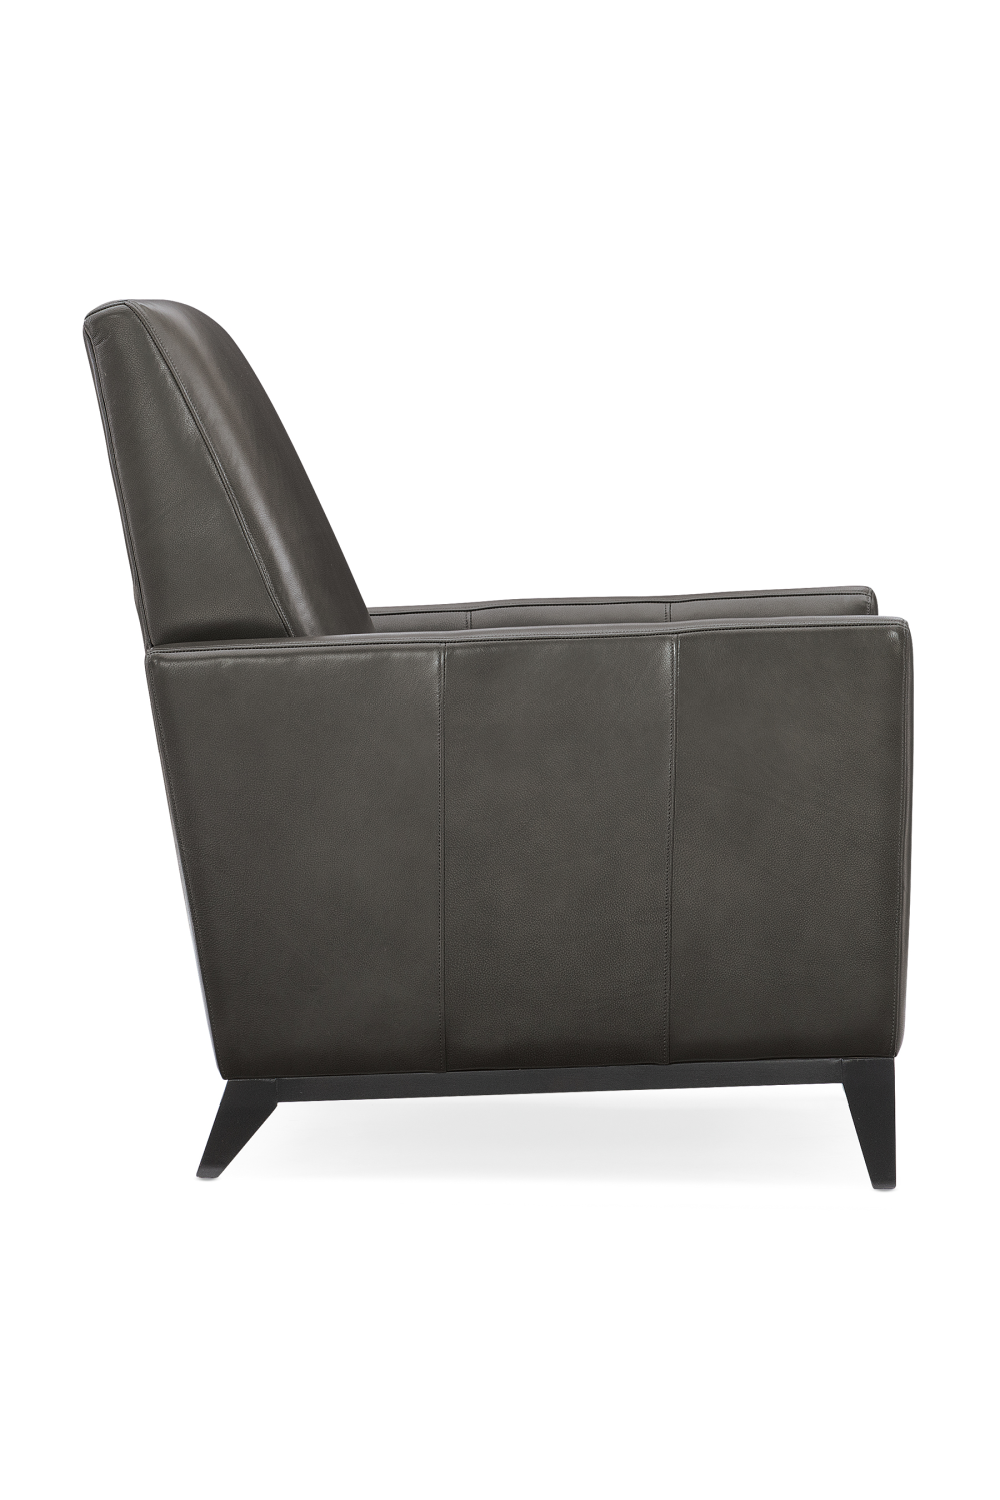 Black Leather Reclining Chair | Caracole Lean On Me | Oroa.com